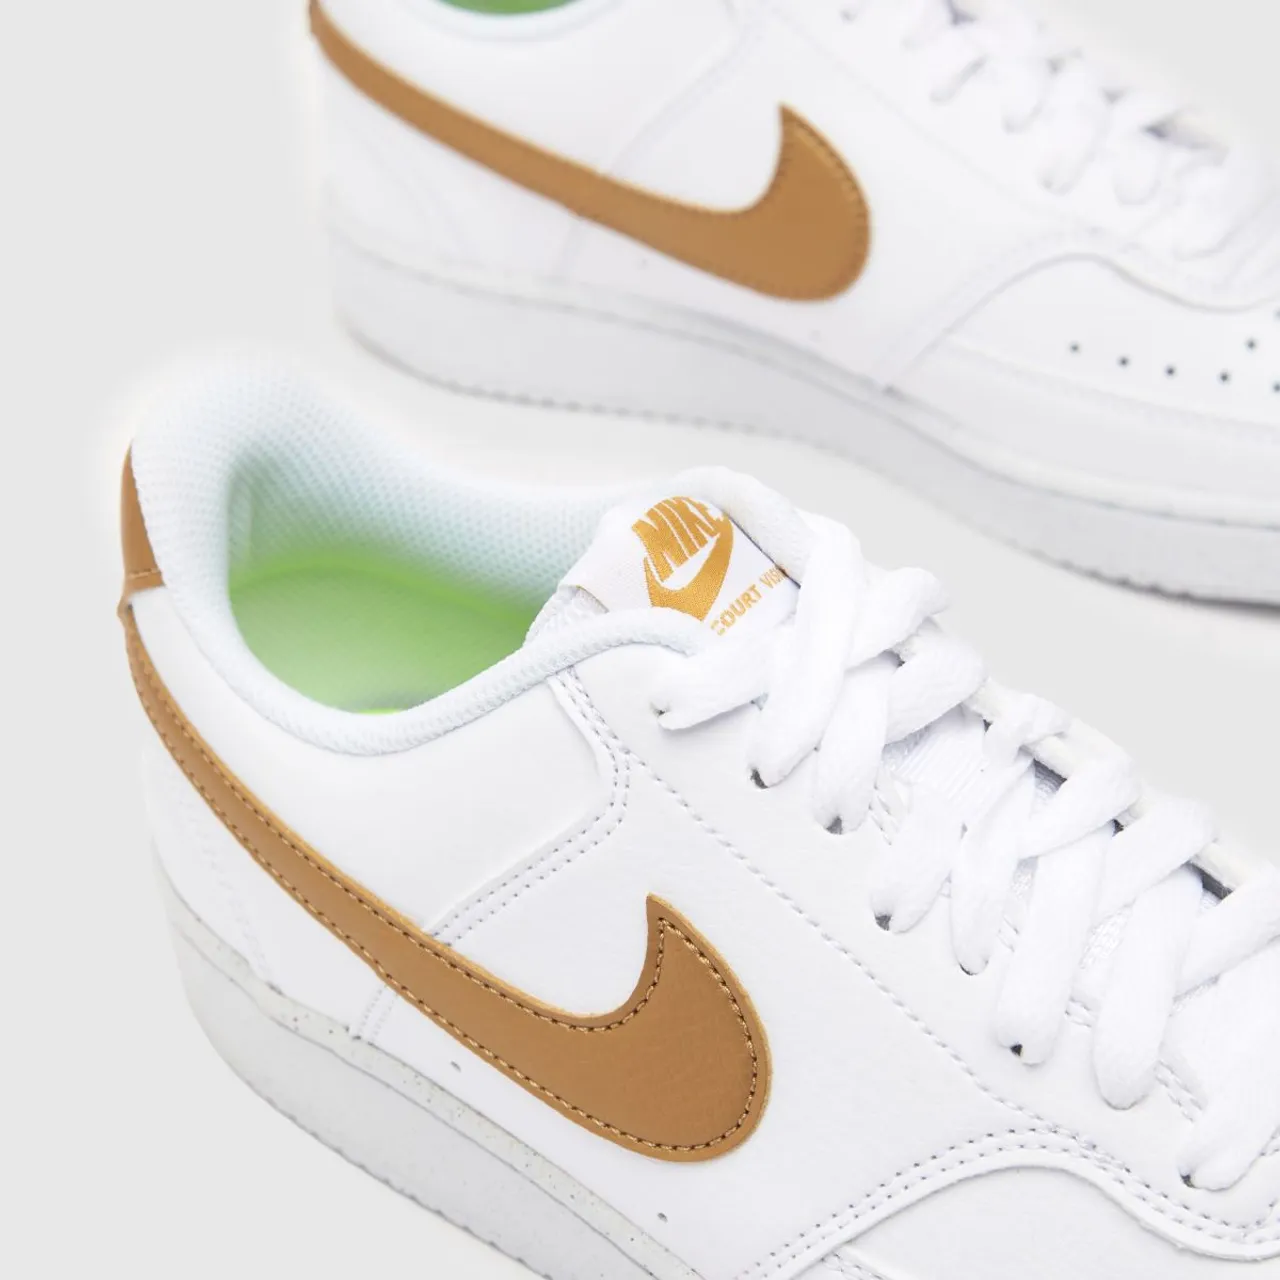 Nike Court Vision Trainers In White & Gold